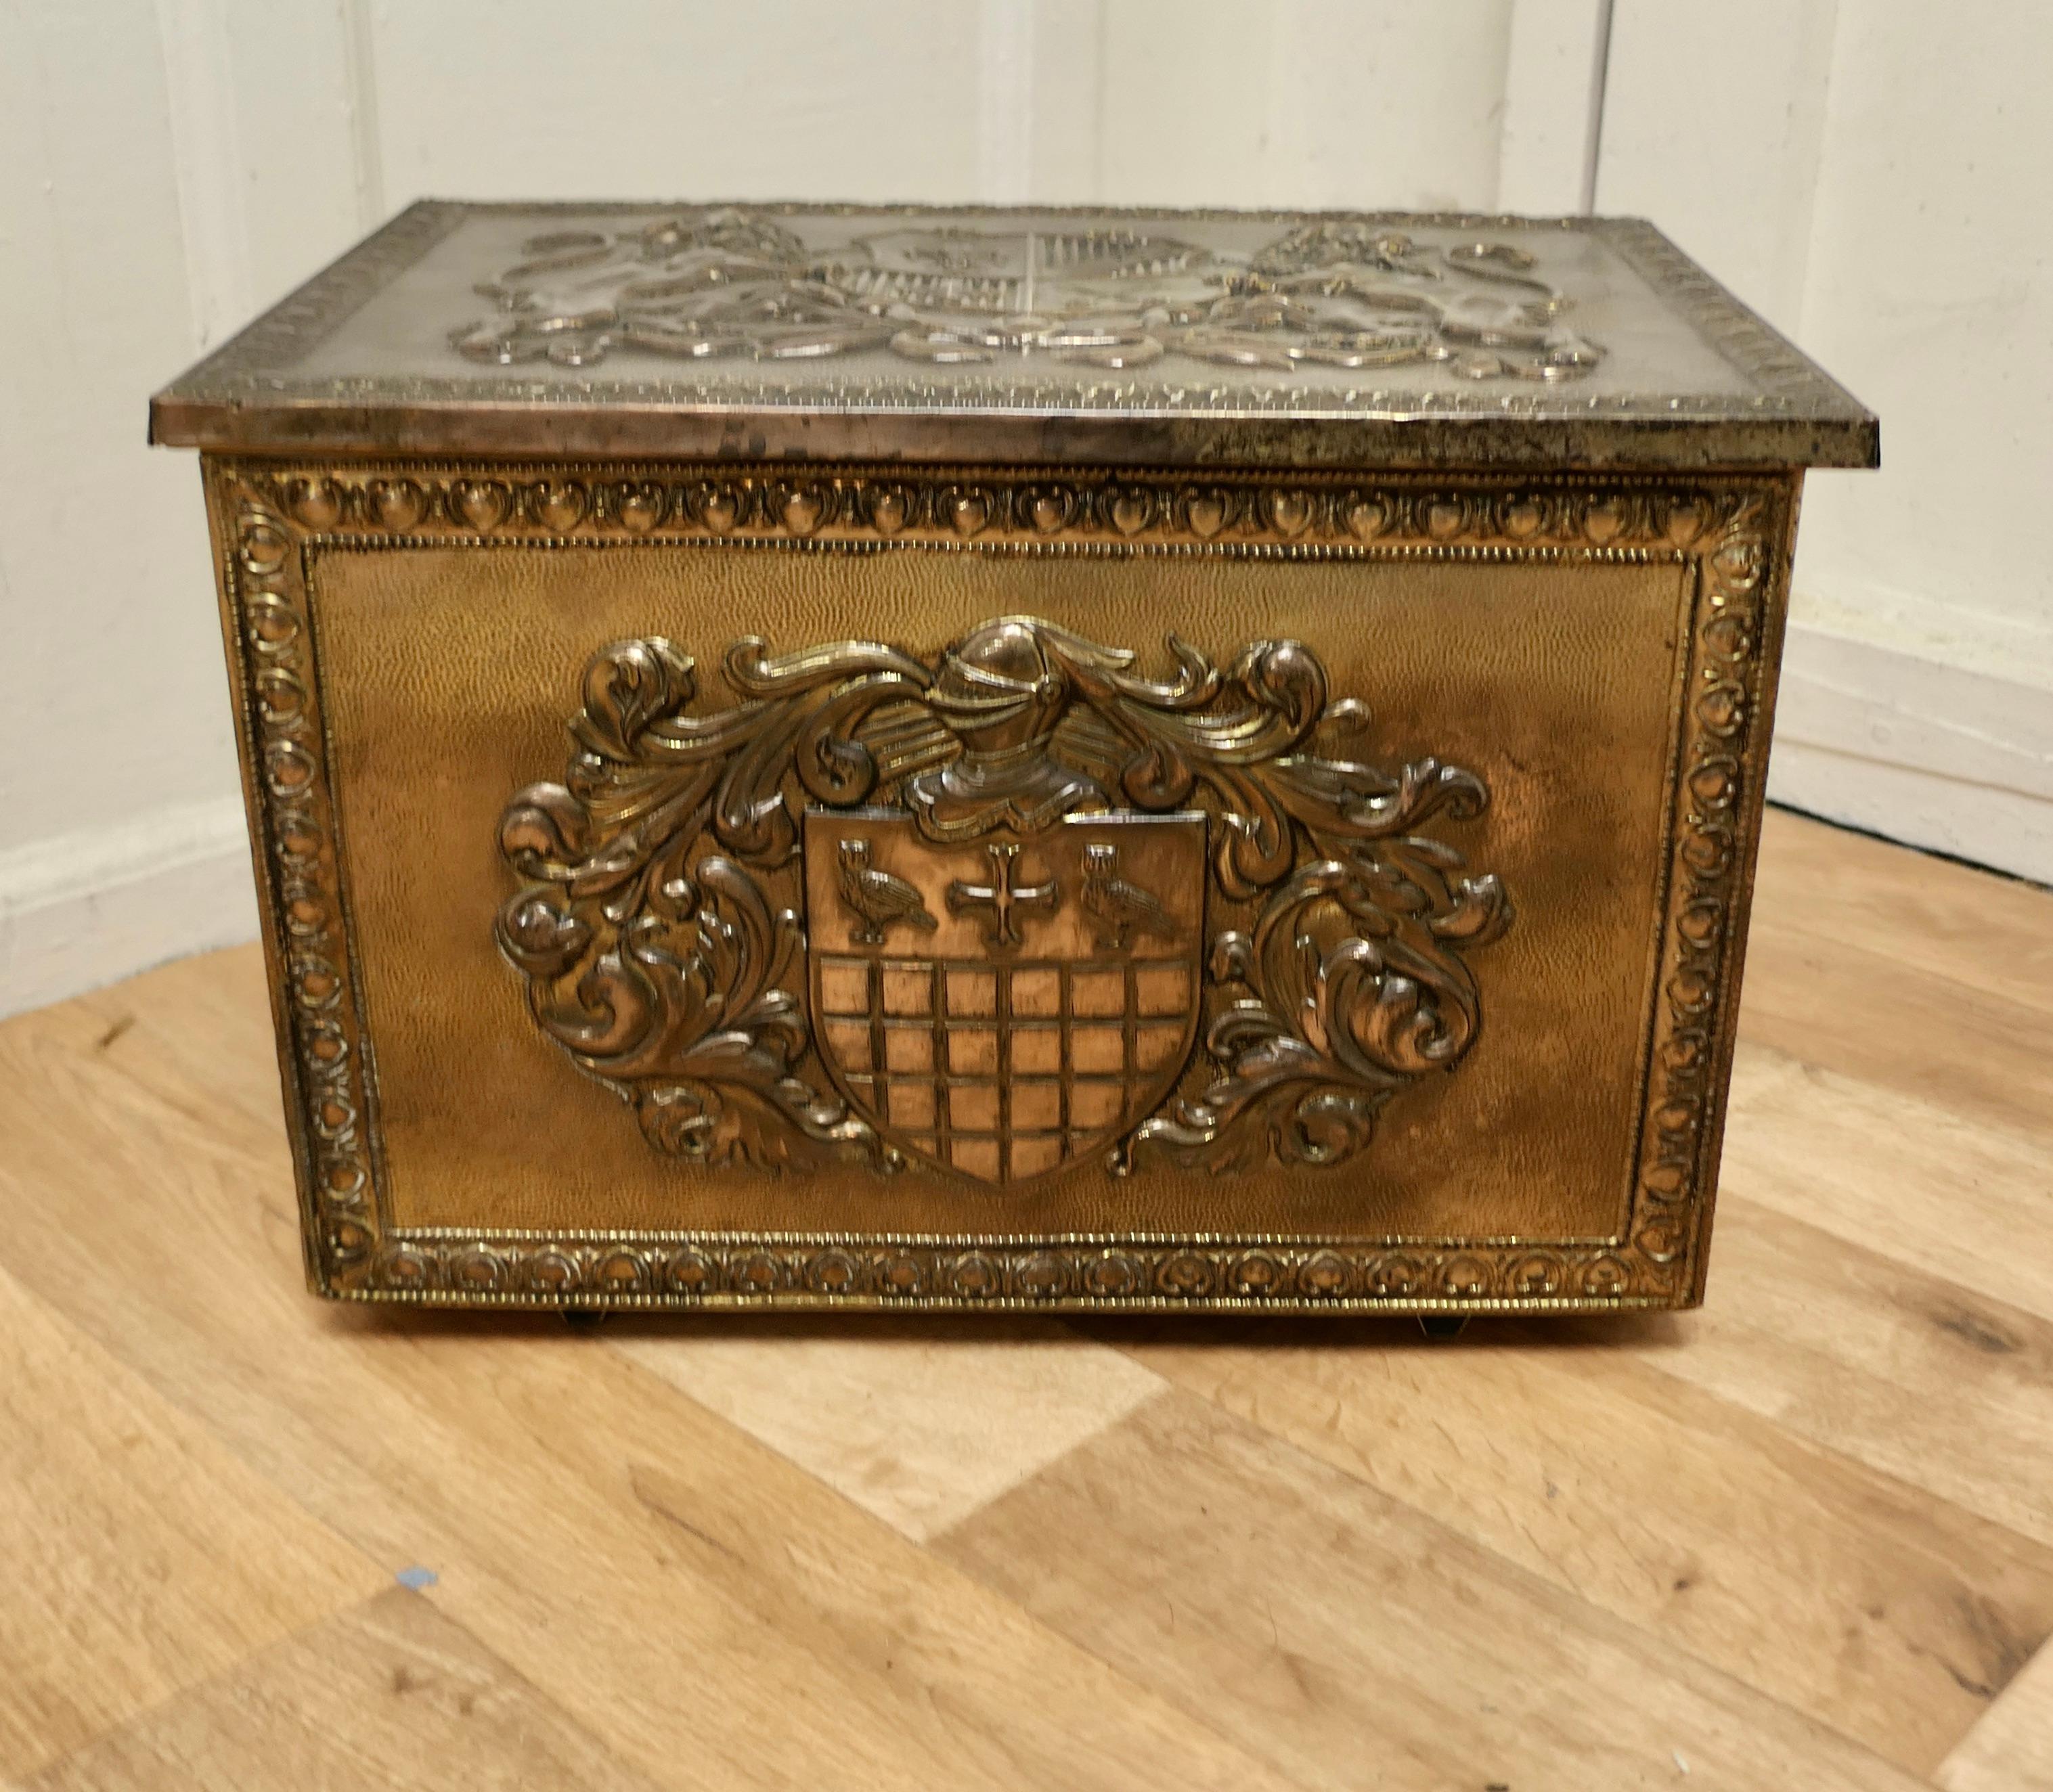 Heraldic embossed brass log box, with coats of arms.

This is a strong chest is made in Brass, the beaten brass is embossed with coats of Arms with Fleur des Lys and Crossed Keys.
This is an old piece it has a very good dark colour, it is in good